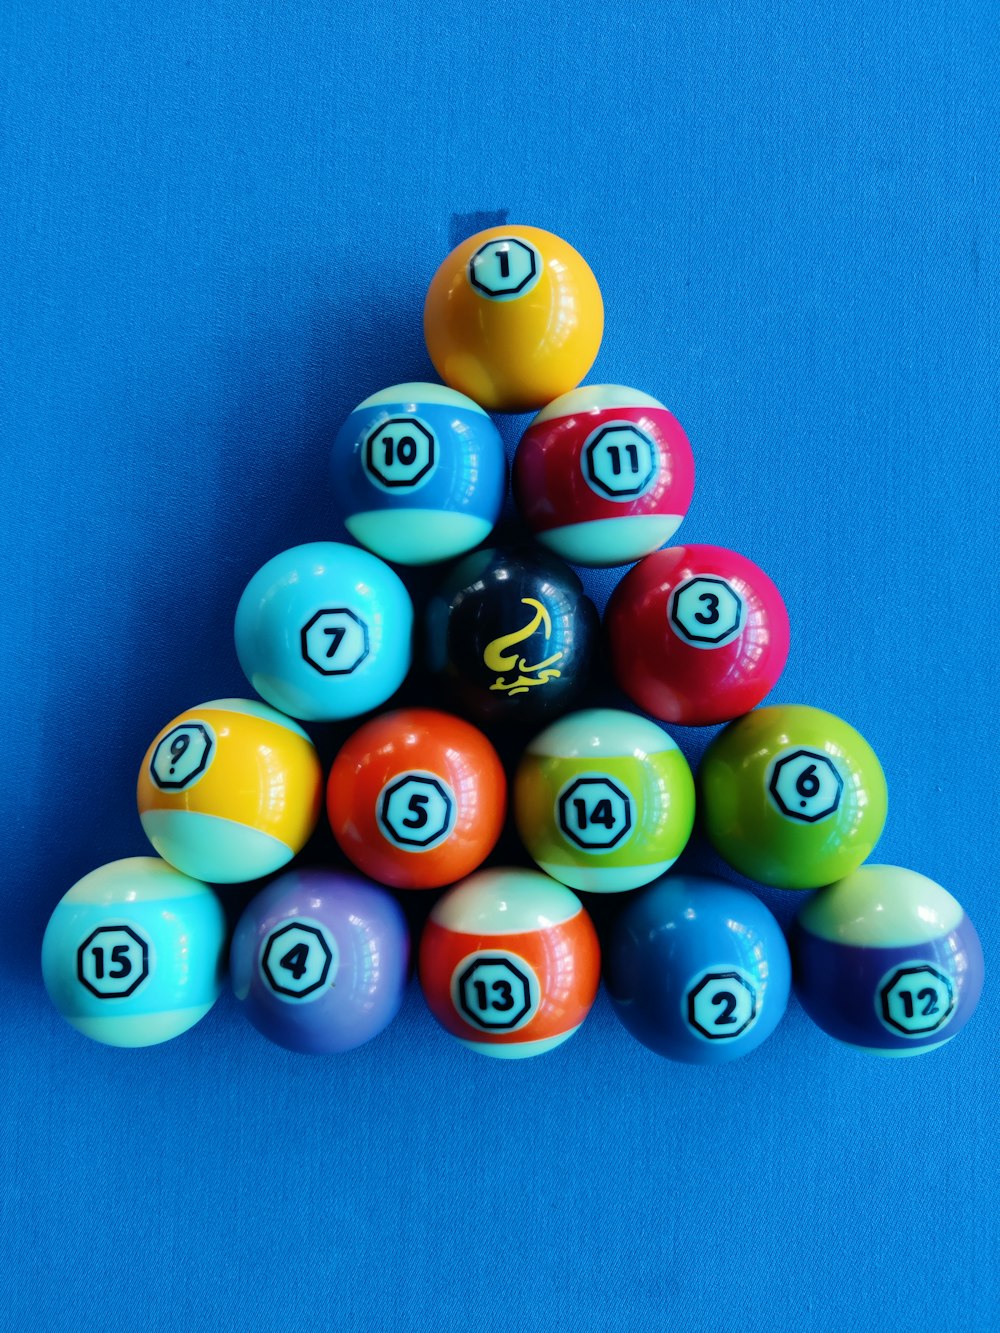 a pyramid of pool balls on a blue background